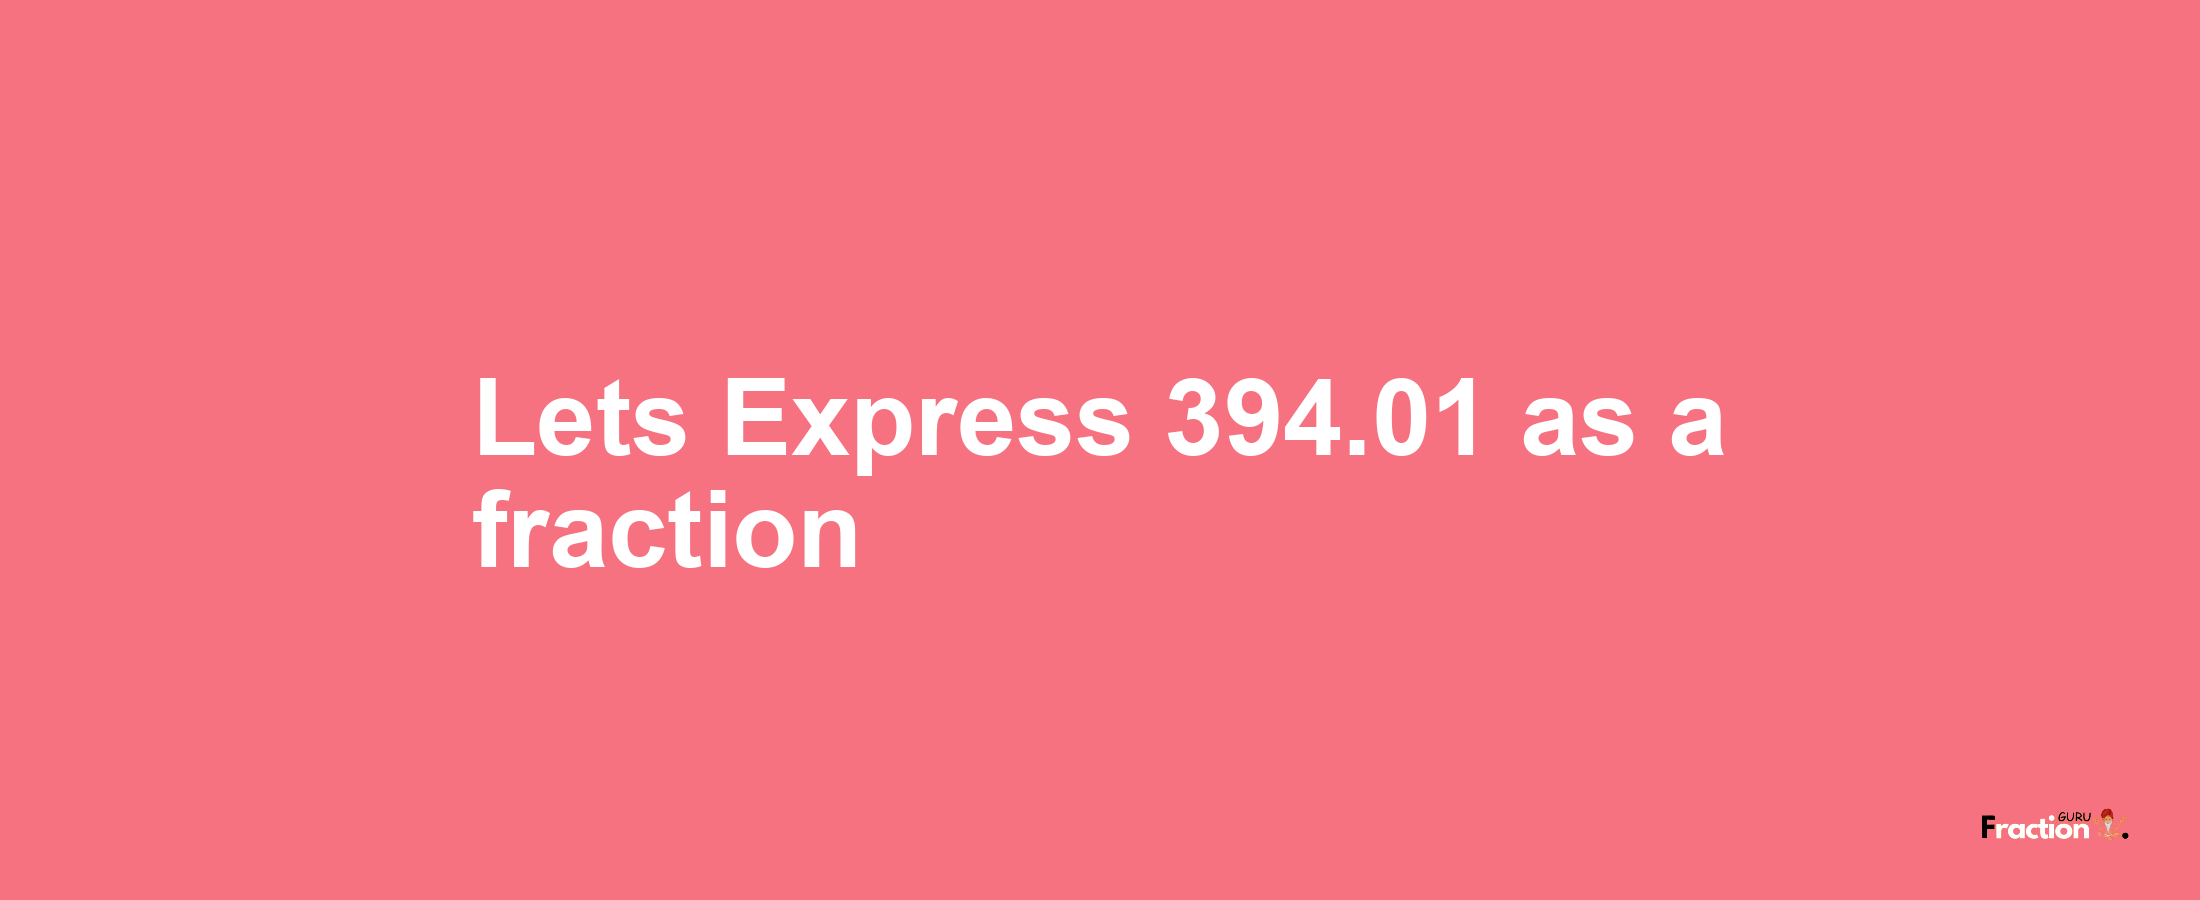 Lets Express 394.01 as afraction